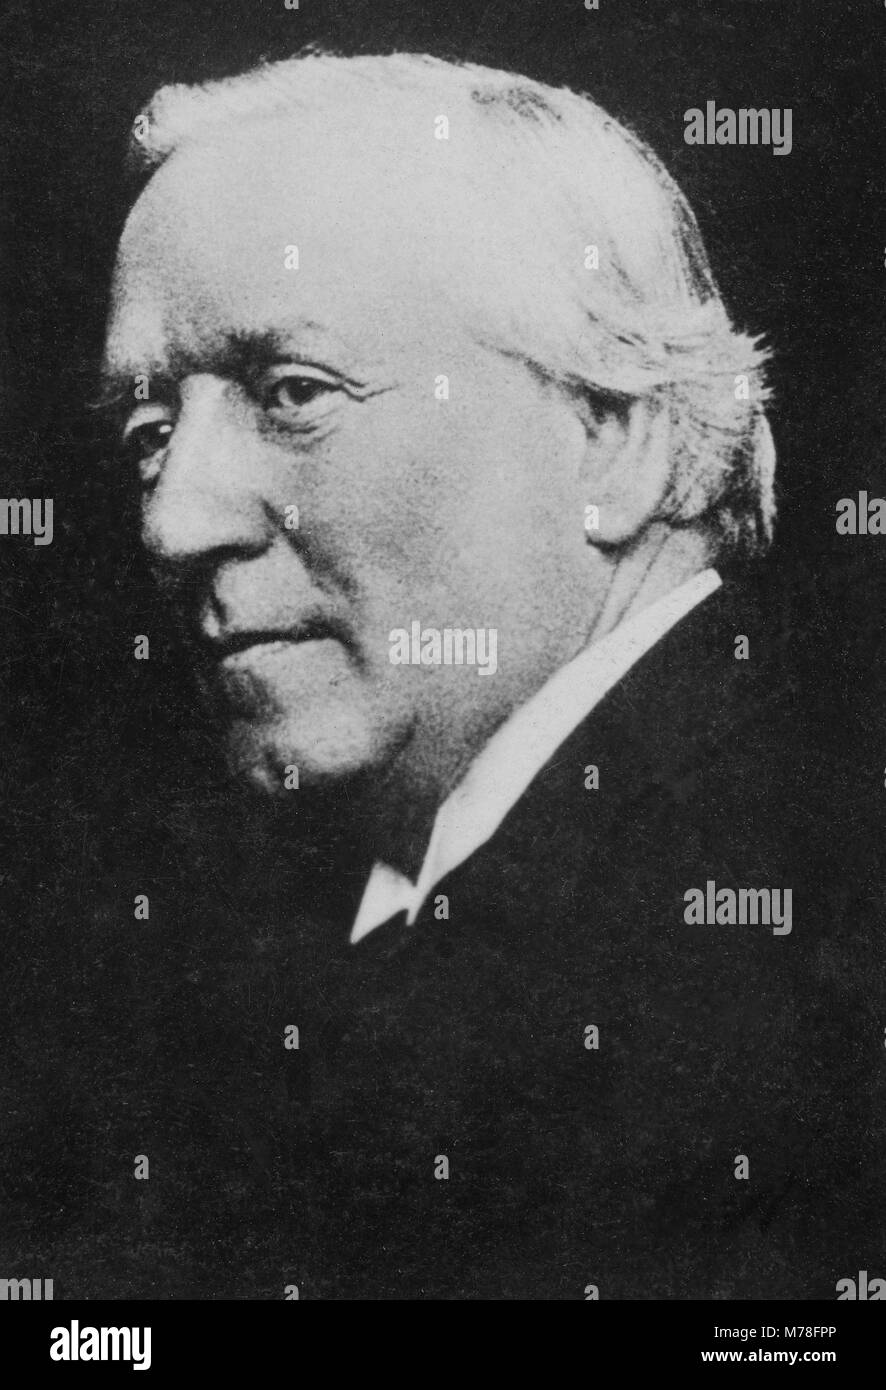 Portrait of Herbert - Henry Asquith ( 1852 - 1928 ) leader of the Scottish Liberal party, deputy in 1886, prime minister from 1908 to 1916  -  anonymo Stock Photo